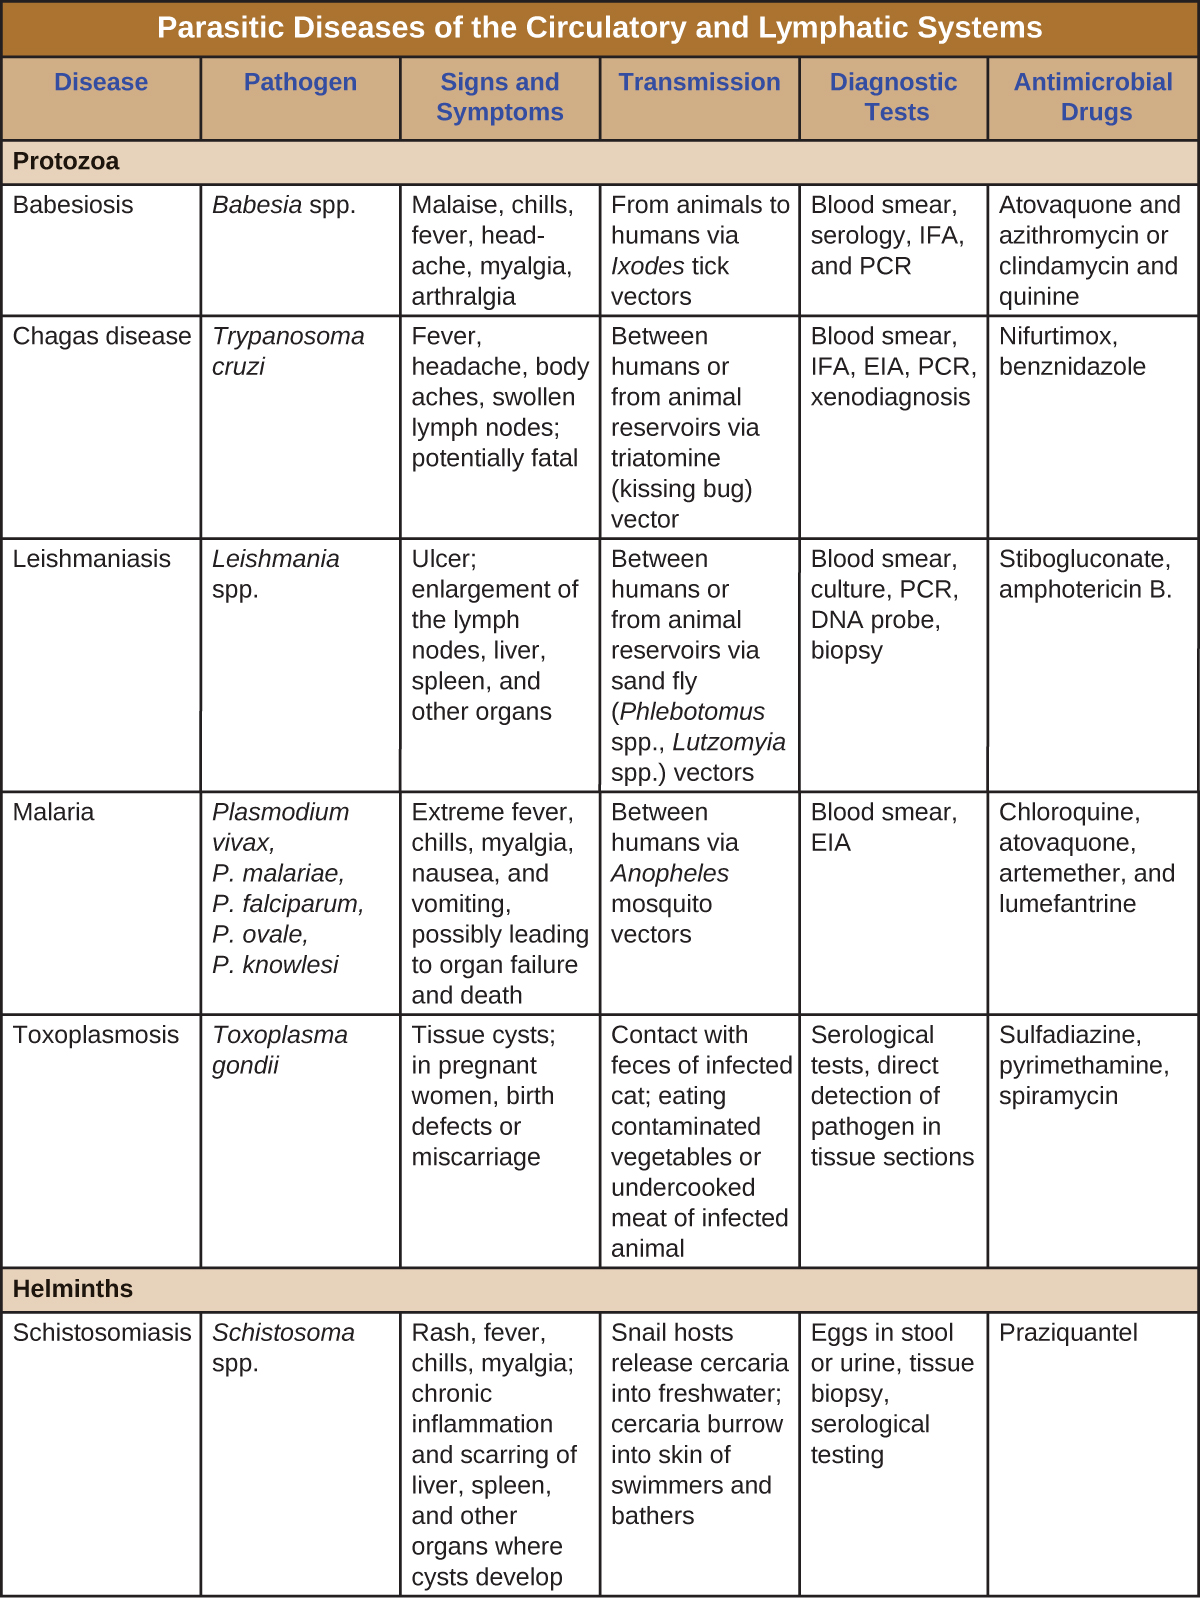 Table titled: Parasitic Diseases of the Circulatory and Lymphatic Systems. Columns: Disease, Pathogen, Signs and Symptoms, Transmission, Diagnostic Tests, Antimicrobial Drugs, Protozoa. Babesiosis; Babesia spp.; Malaise, chills, fever, headache, myalgia, arthralgia; From animals to humans via Ixodes tick vectors; Blood smear, serology, IFA, and PCR; Atovaquone and azithromycin or clindamycin and quinine. Chagas disease ; Trypanosoma cruzi; Fever, headache, body aches, swollen lymph nodes; potentially fatal; Between humans or from animal reservoirs via triatomine (kissing bug) vector; Blood smear, IFA, EIA, PCR, xenodiagnoses; Nifurtimox, benznidazole. Leishmaniasis Leishmania spp.; Ulcer; enlargement of the lymph nodes, liver, spleen, and other organs; Between humans or from animal reservoirs via sand fly (Phlebotomus spp., Lutzomyia spp.) vectors; Blood smear, culture, PCR, DNA probe, biopsy; Stibogluconate, amphotericin B, miltefosine. Malaria; Plasmodium vivax, P. malariae, P. falciparum, P. ovale, P. knowlesi; Extreme fever, chills, myalgia, nausea, and vomiting, possibly leading to organ failure and death; Between humans via Anopheles mosquito vectors; Blood smear, EIA; Chloroquine, atovaquone, artemether, and lumefantrine. Toxoplasmosis Toxoplasma gondii; Tissue cysts; in pregnant women, birth defects or miscarriage; Contact with feces of infected cat; eating contaminated vegetables or undercooked meat of infected animal; Serological tests, direct detection of pathogen in tissue sections; Sulfadiazine, pyrimethamine, spiramycin; Helminths. Schistosomiasis; Schistosoma spp.; Rash, fever, chills, myalgia; chronic inflammation and scarring of liver, spleen, and other organs where cysts develop; Snail hosts release cercaria into freshwater; cercaria burrow into skin of swimmers and bathers; Eggs in stool or urine, tissue biopsy, serological testing; Praziquantel..